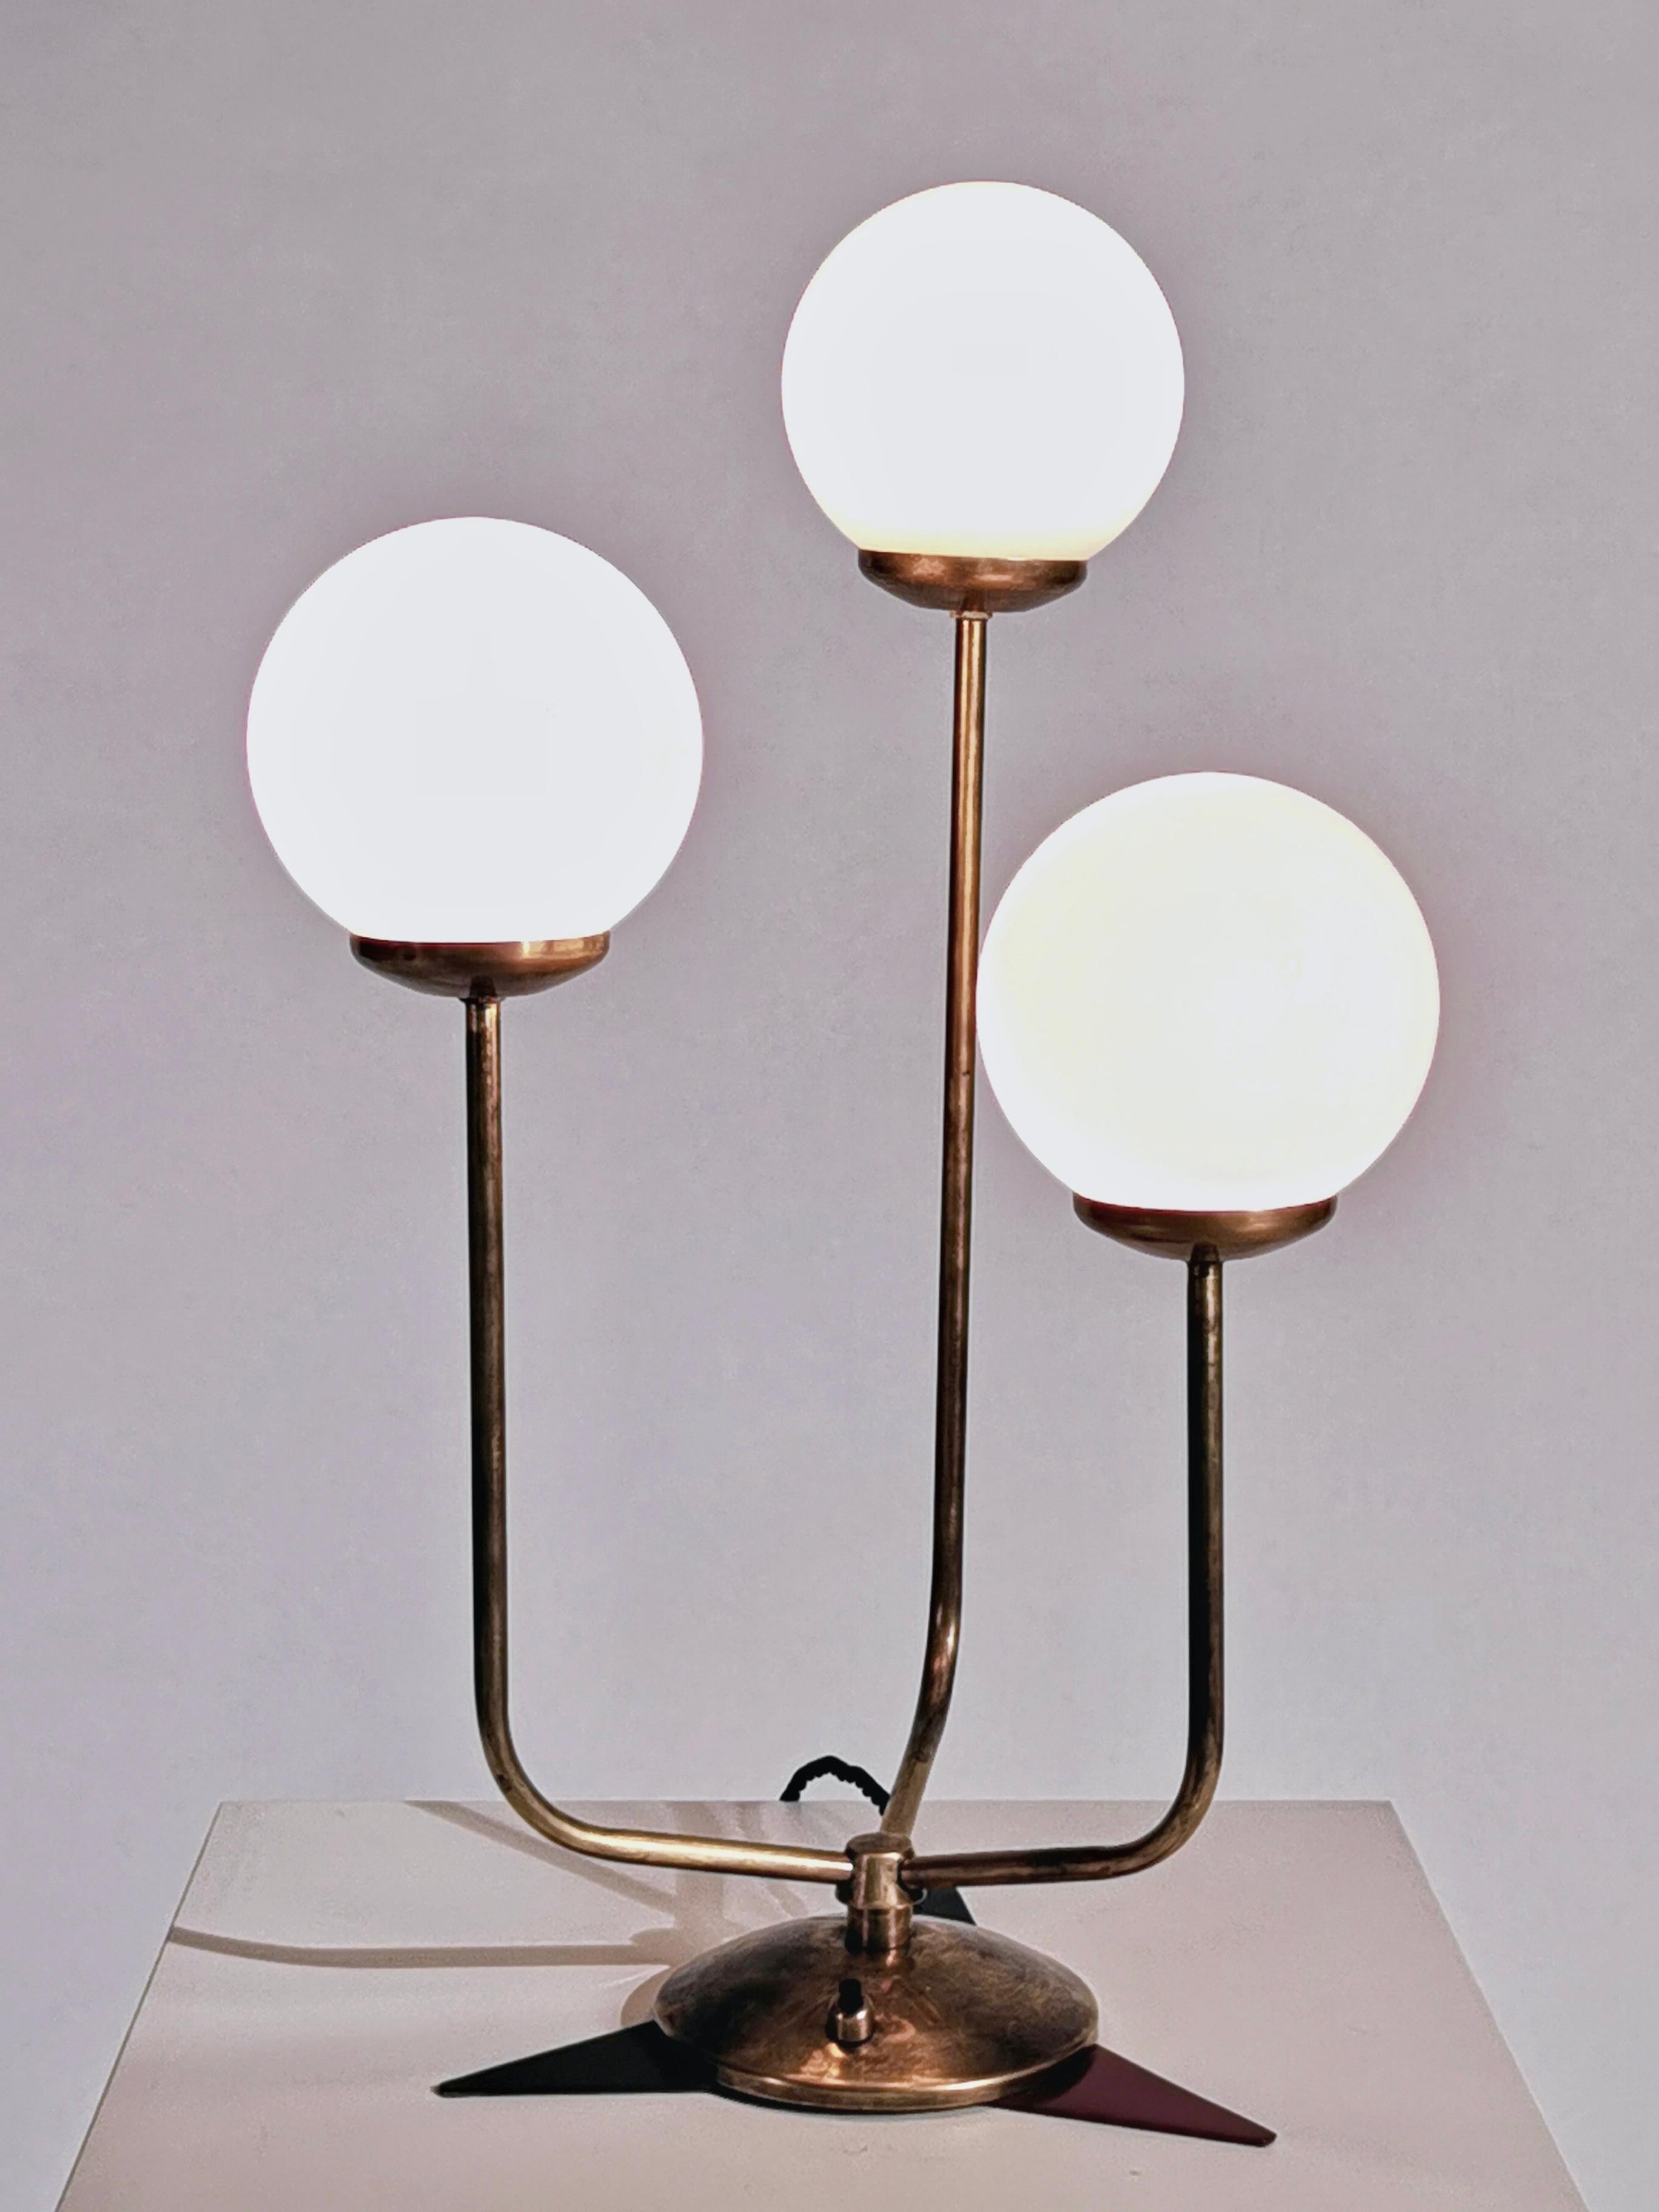 Table lamp, Italian Design from the 1960s, Brass and Opaline Glass on a 